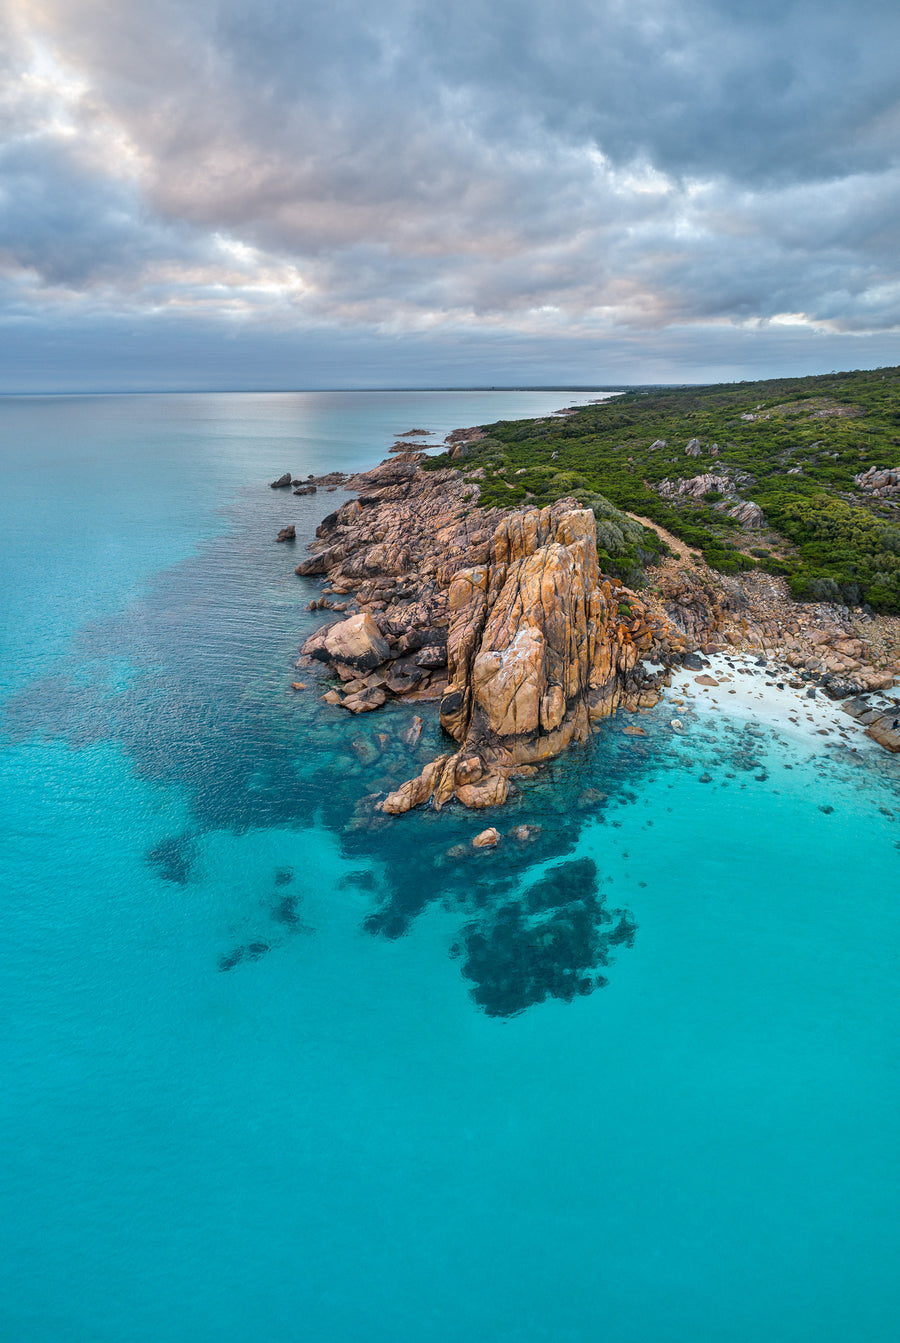 Aerial photograph of Castle Rock, Dunsborough, Western Australia.  The turquoise waters of Geographe Bay with Castle Rock in the foreground looking to Dunsborough in the background.  Morning sunrise with clouds over the calm blue water.